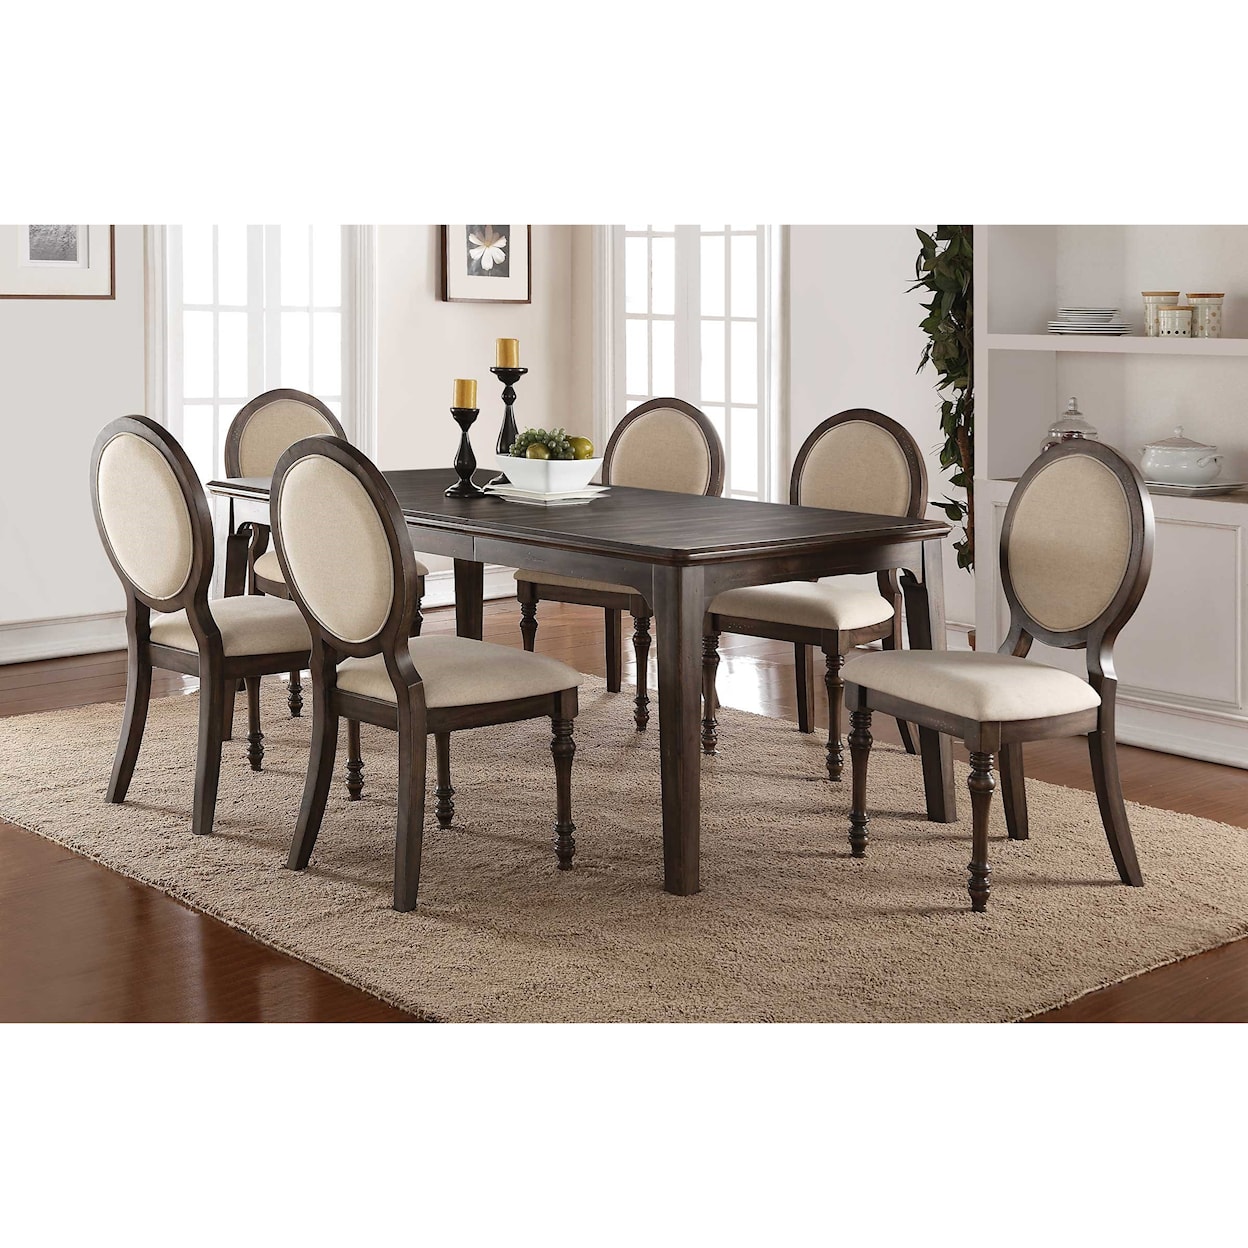 Winners Only Daphne 7-Piece Dining Set